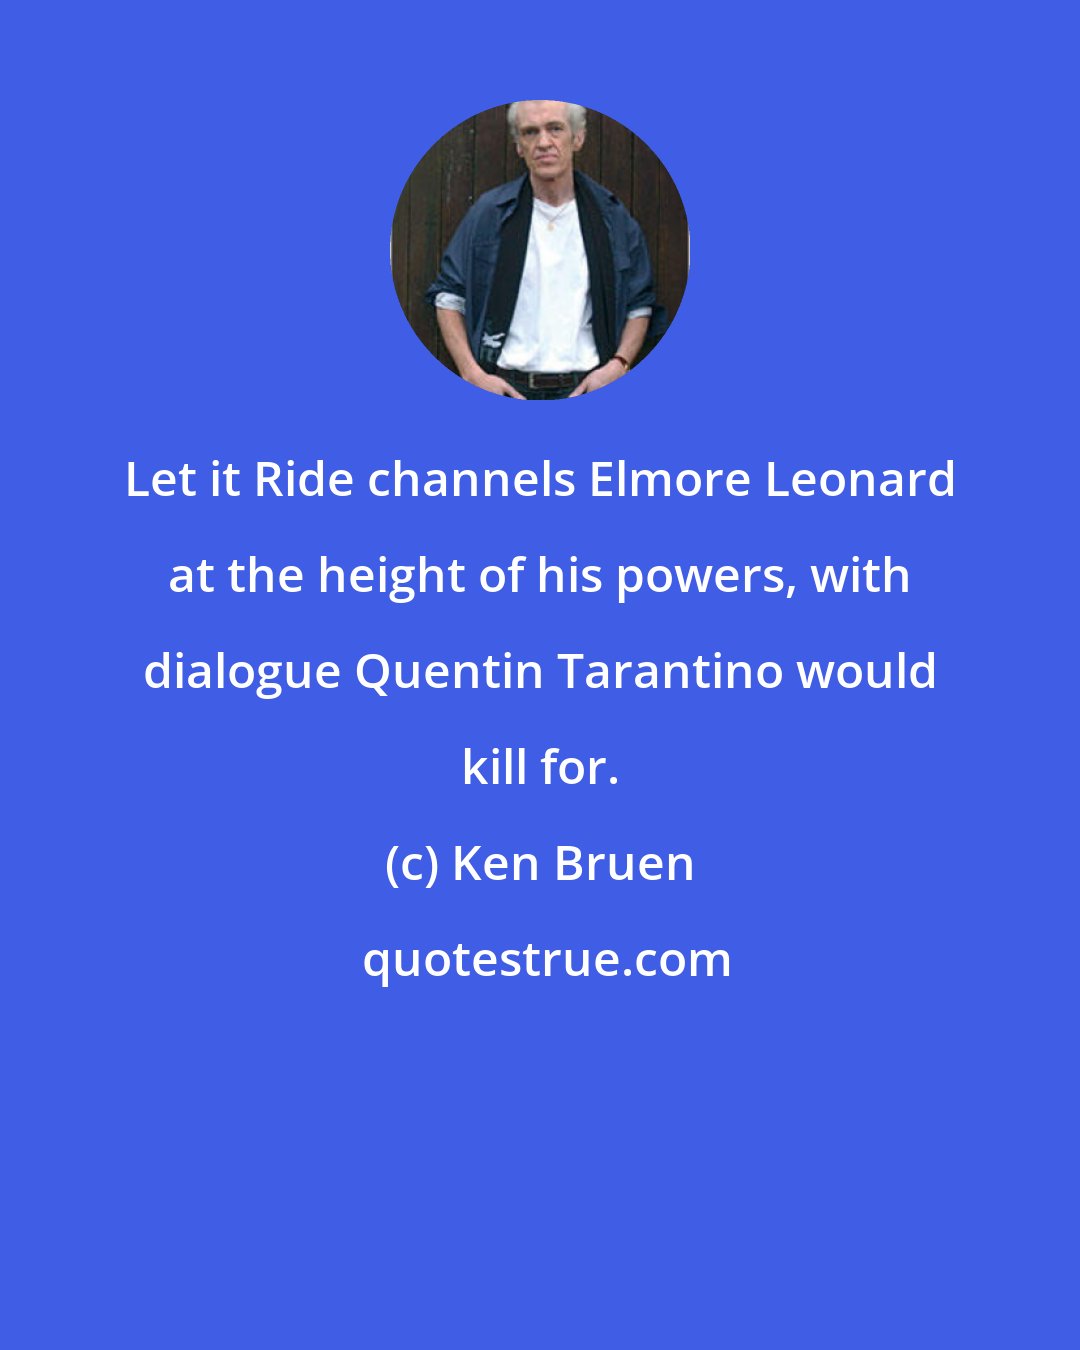 Ken Bruen: Let it Ride channels Elmore Leonard at the height of his powers, with dialogue Quentin Tarantino would kill for.